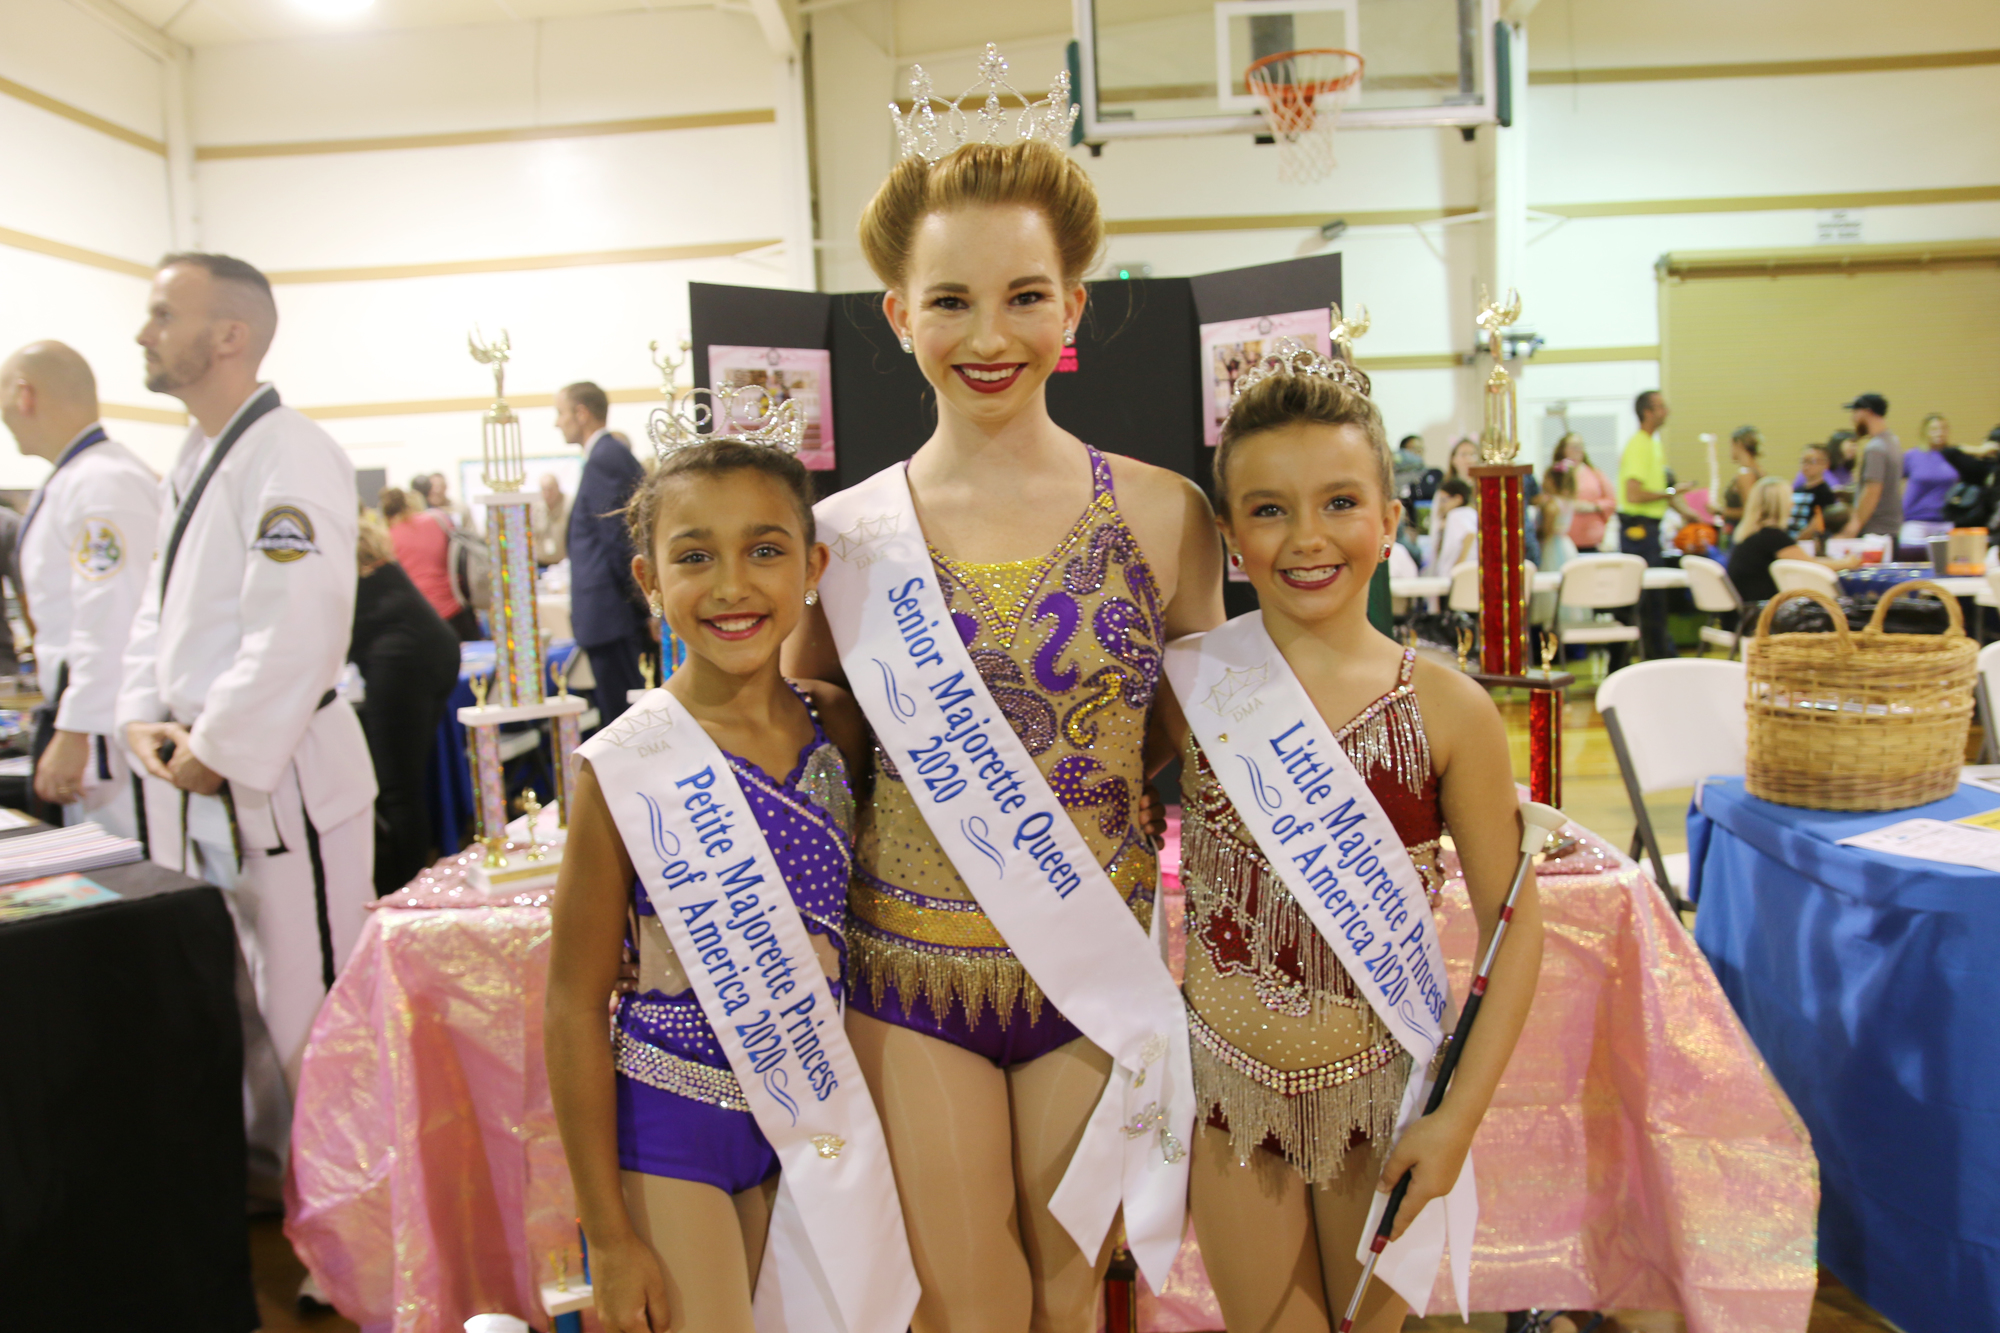 Jaylah Poku, Kennedy Gill and Sarah Sandblom, of Encore Baton Twirling Studio, during the annual National Night Out event on Tuesday, Aug. 6. Photo by Jarleene Almenas